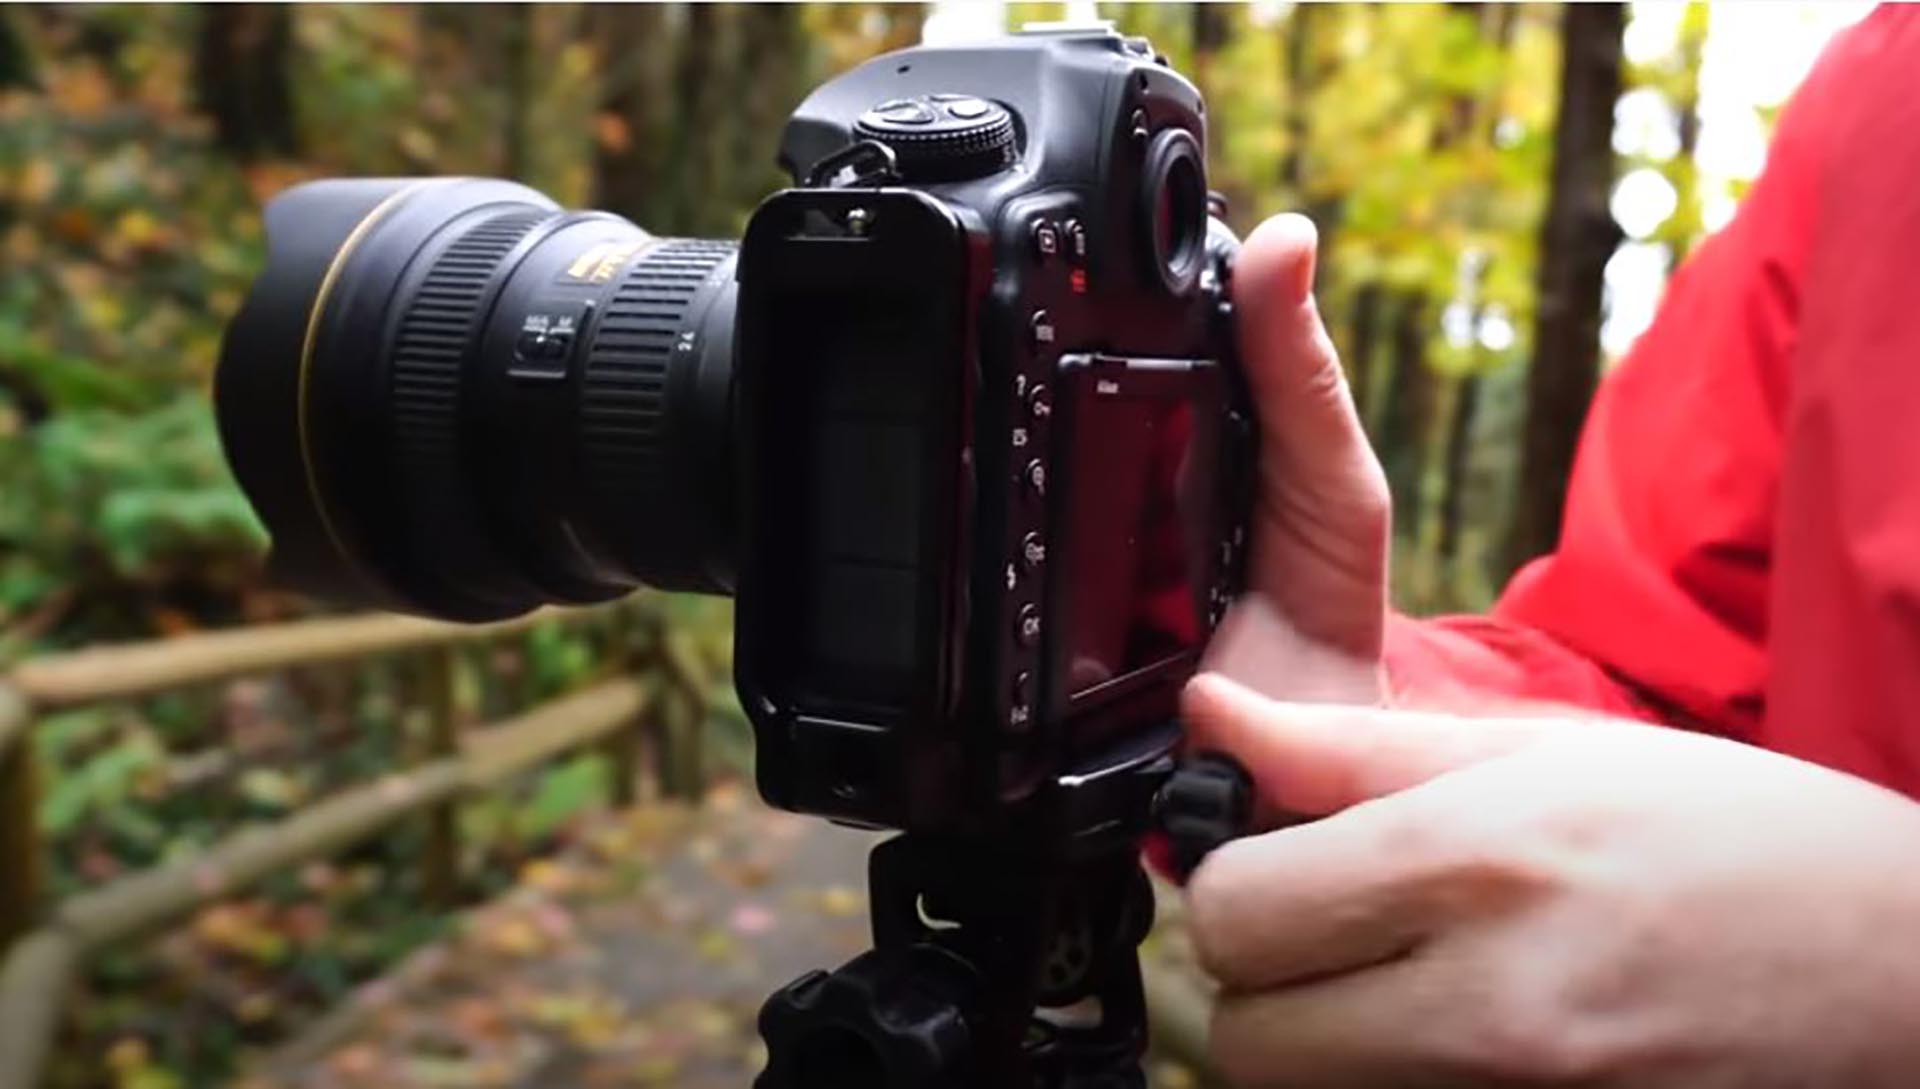 Nikon D850 Review: The best SLR Nikon's made. Ever.